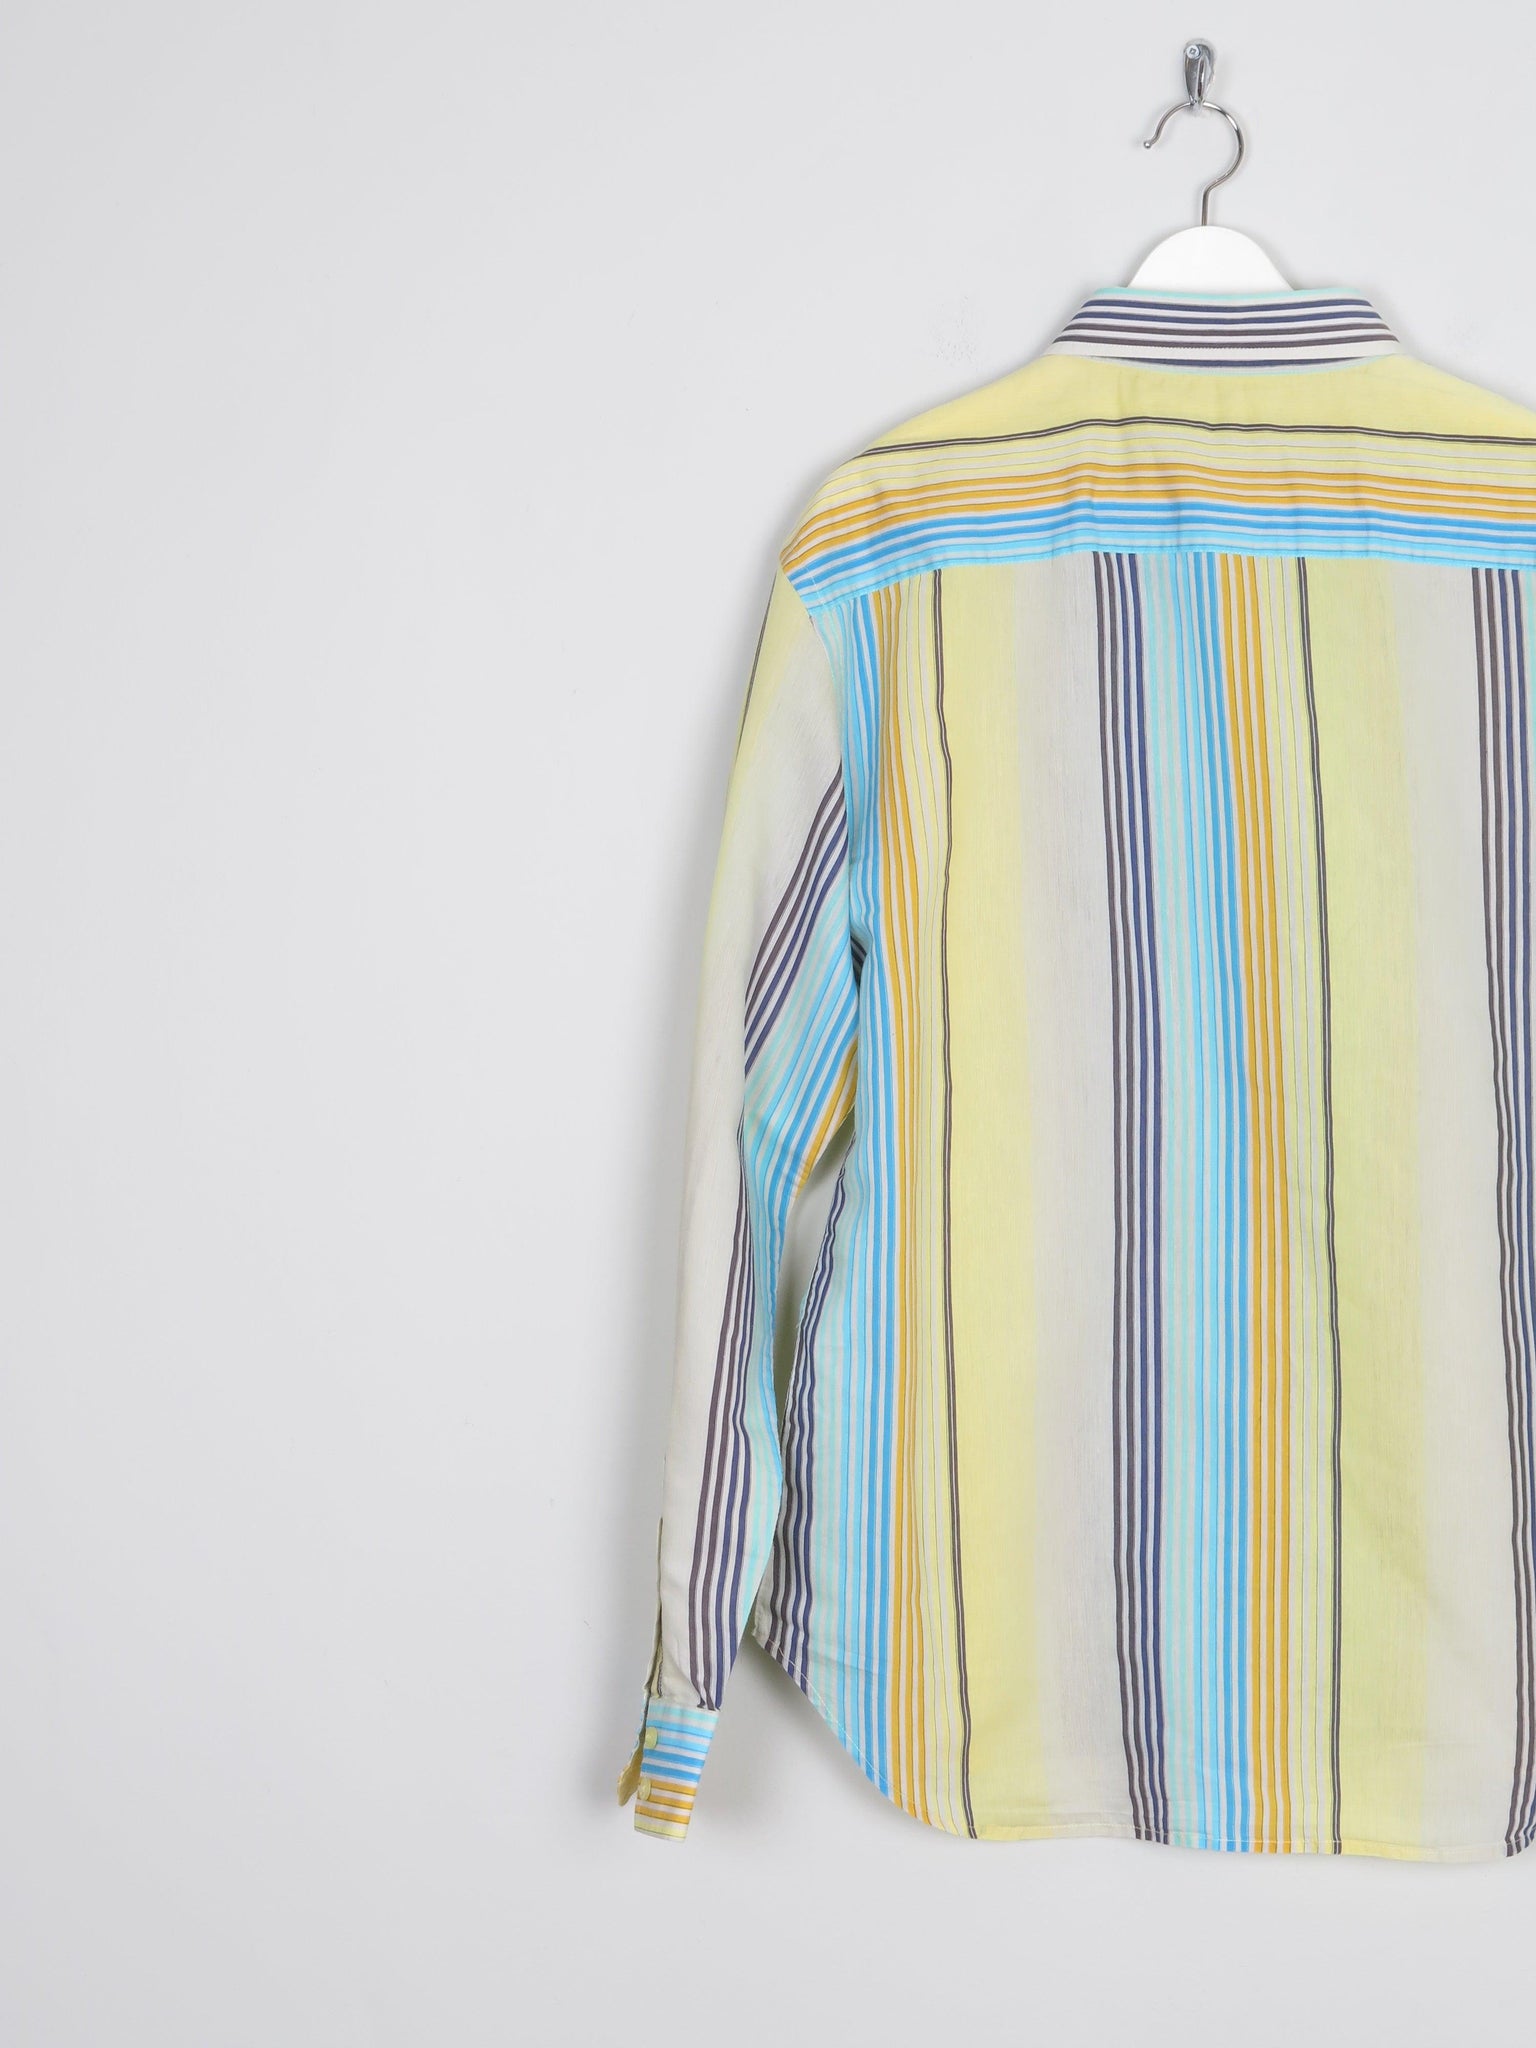 Men's Striped 1990s French Connection Shirt XL - The Harlequin